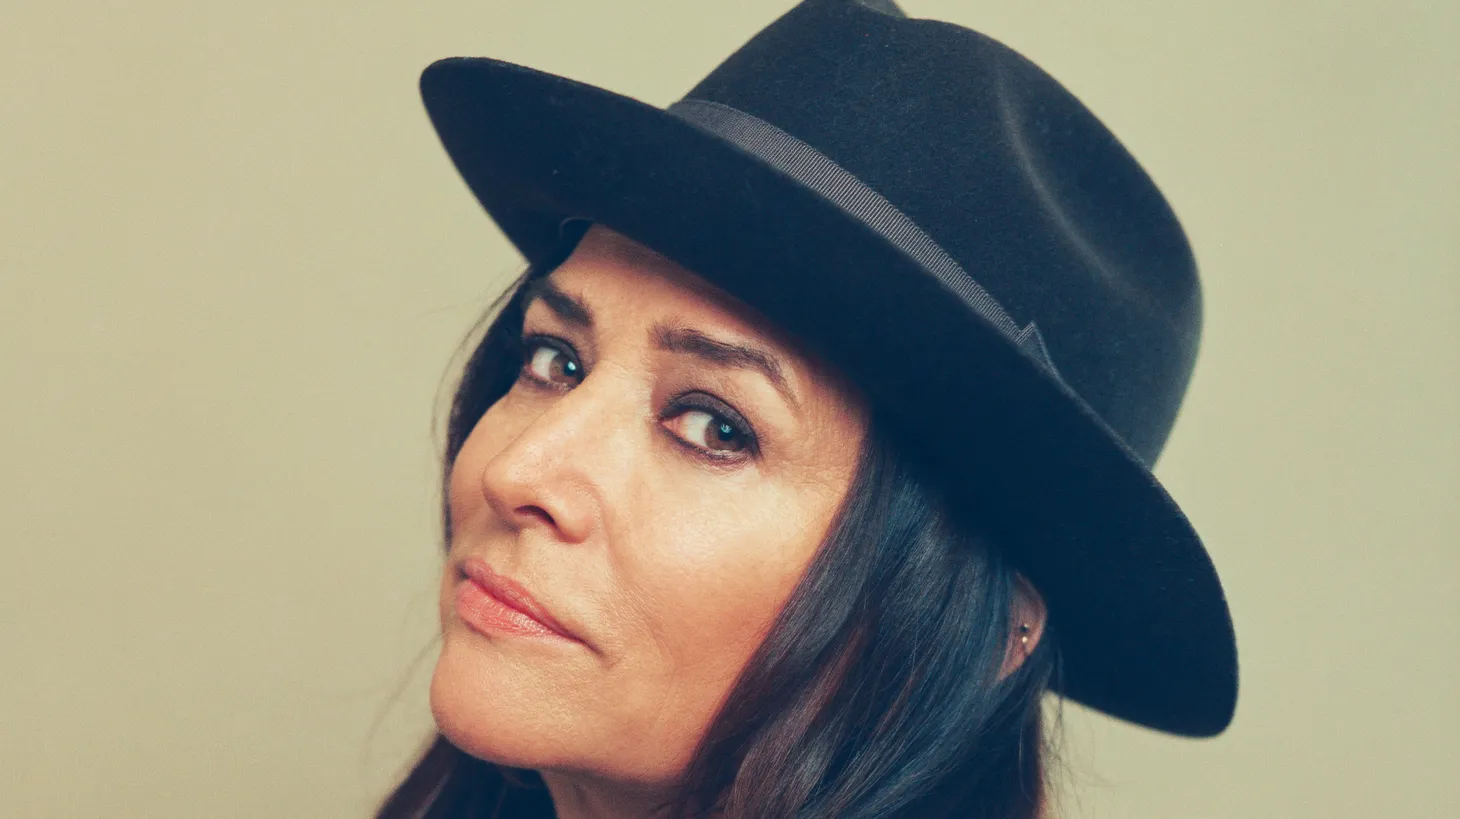 Actress, writer, director (Renaissance woman) Pamela Adlon’s new film “Babes” sets out to demystify a variety of commonly under-discussed human experiences like female friendship and childbirth.